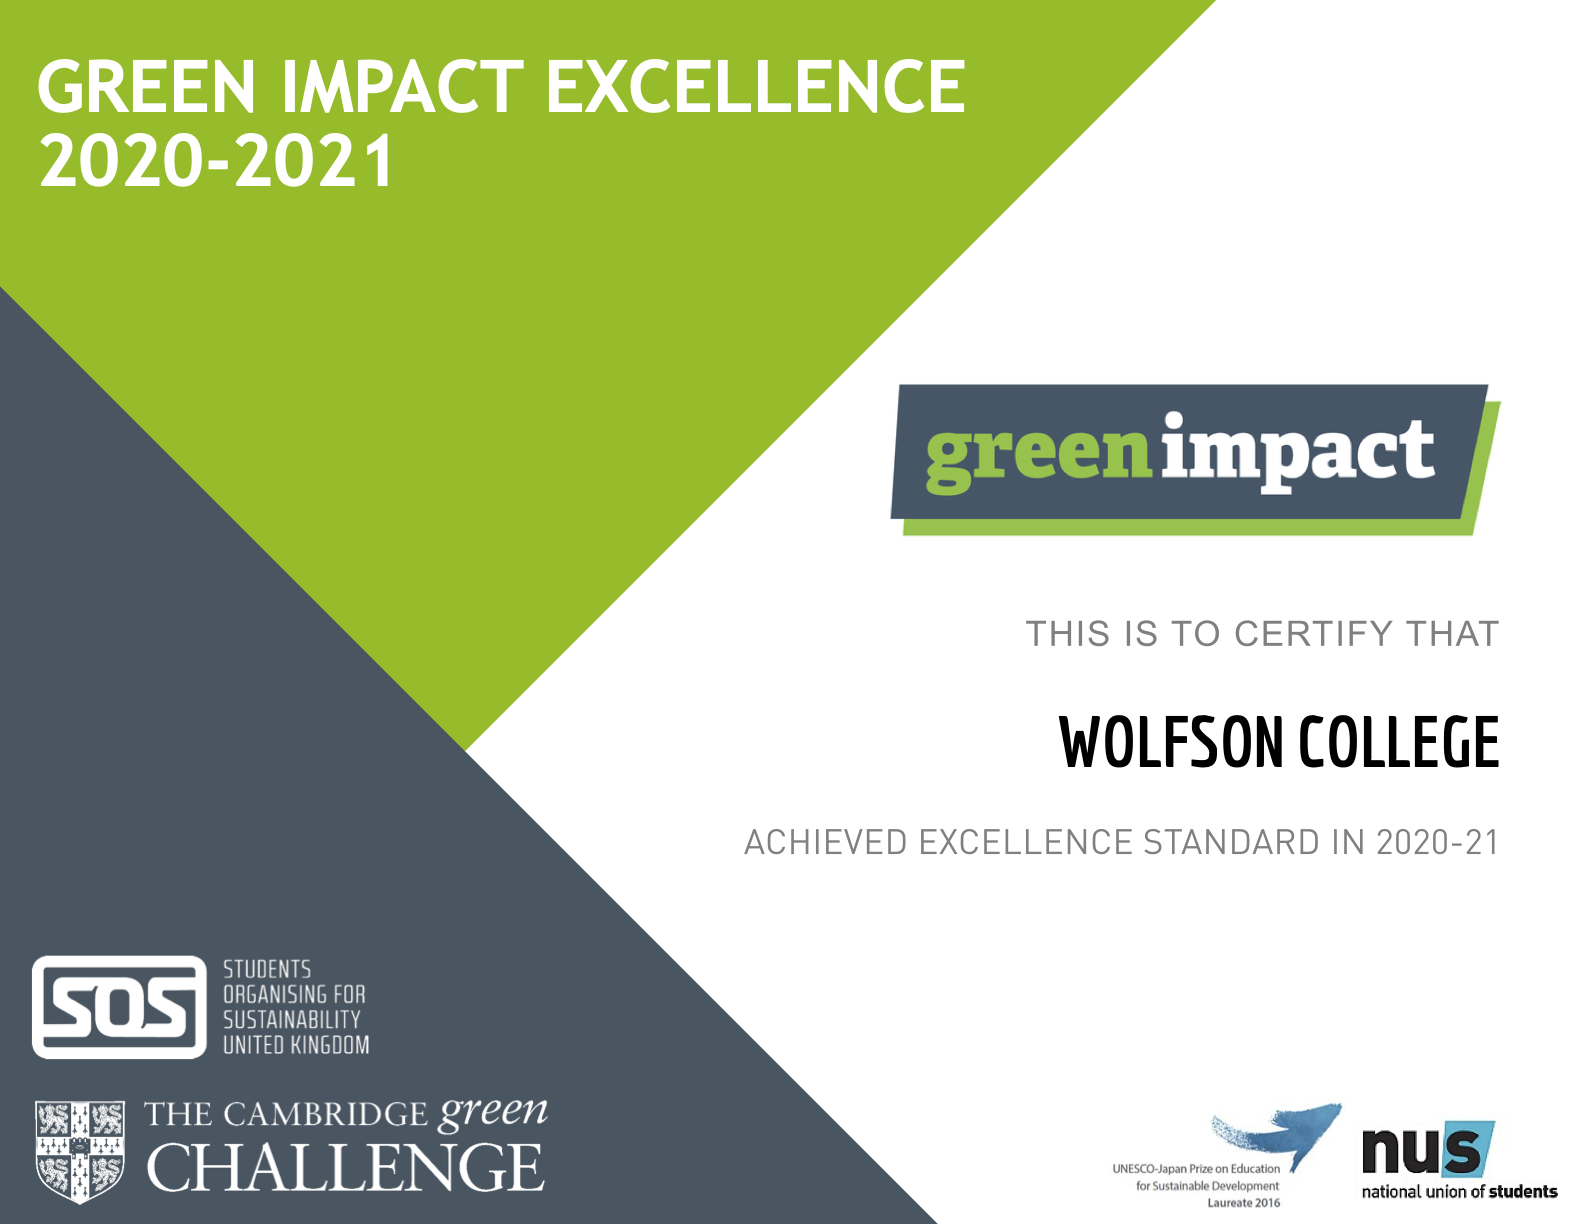 The Green Impact Excellence Award certificate, received 11/06/2021